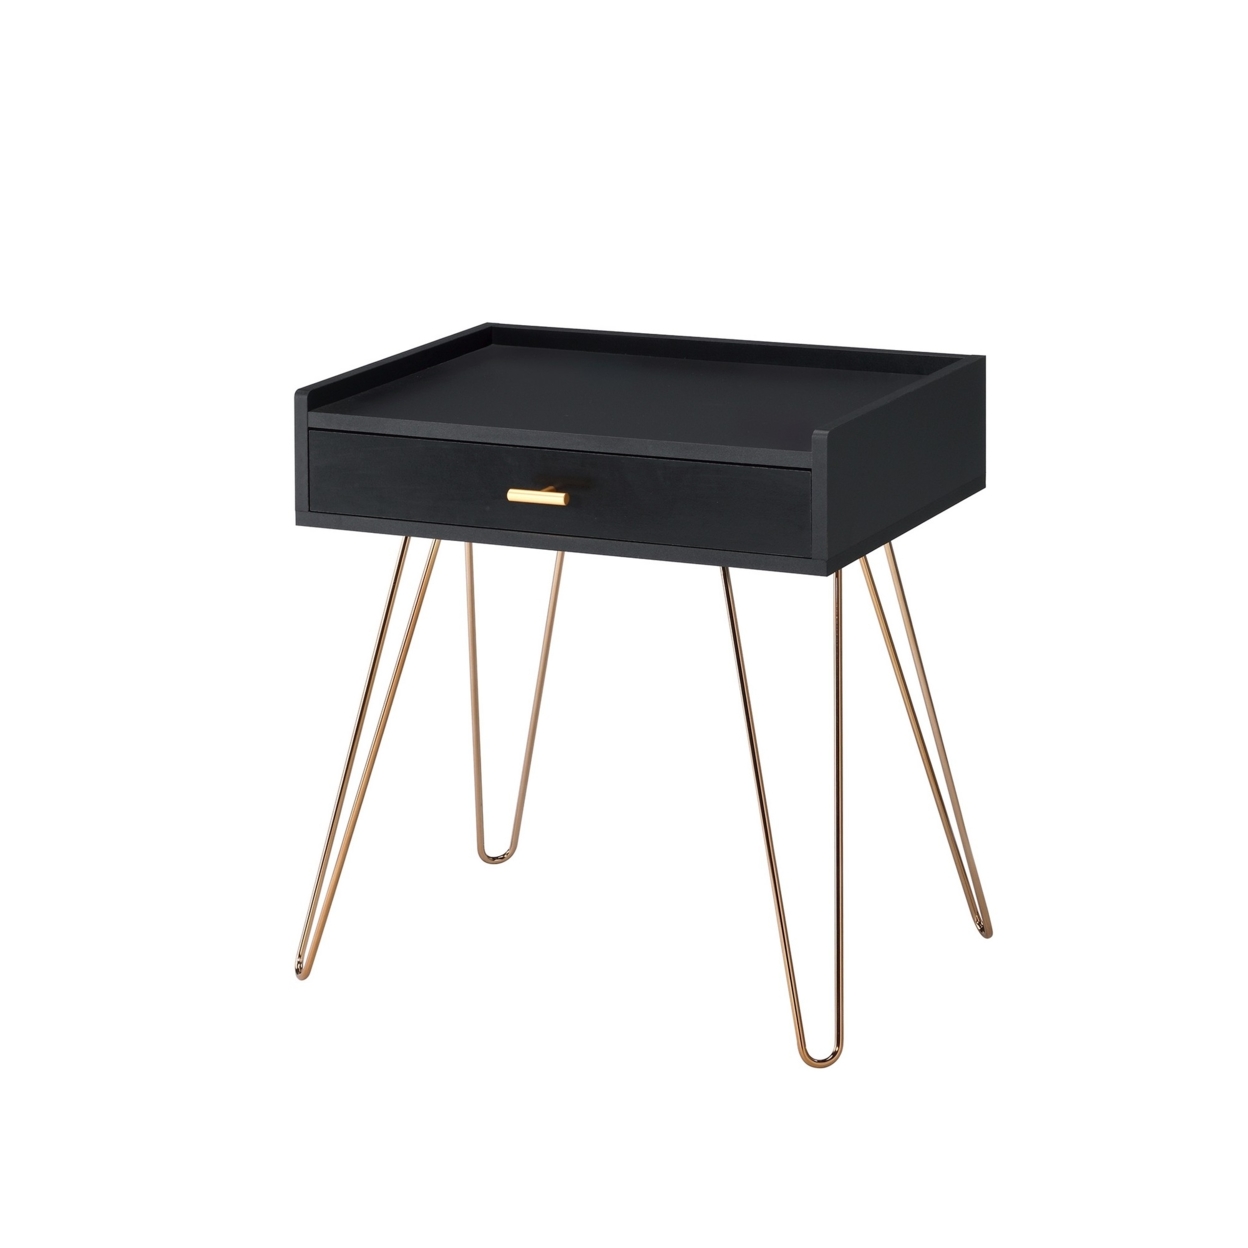 23.5 Inches 1 Drawer End Table With Hairpin Legs, Black And Copper- Saltoro Sherpi